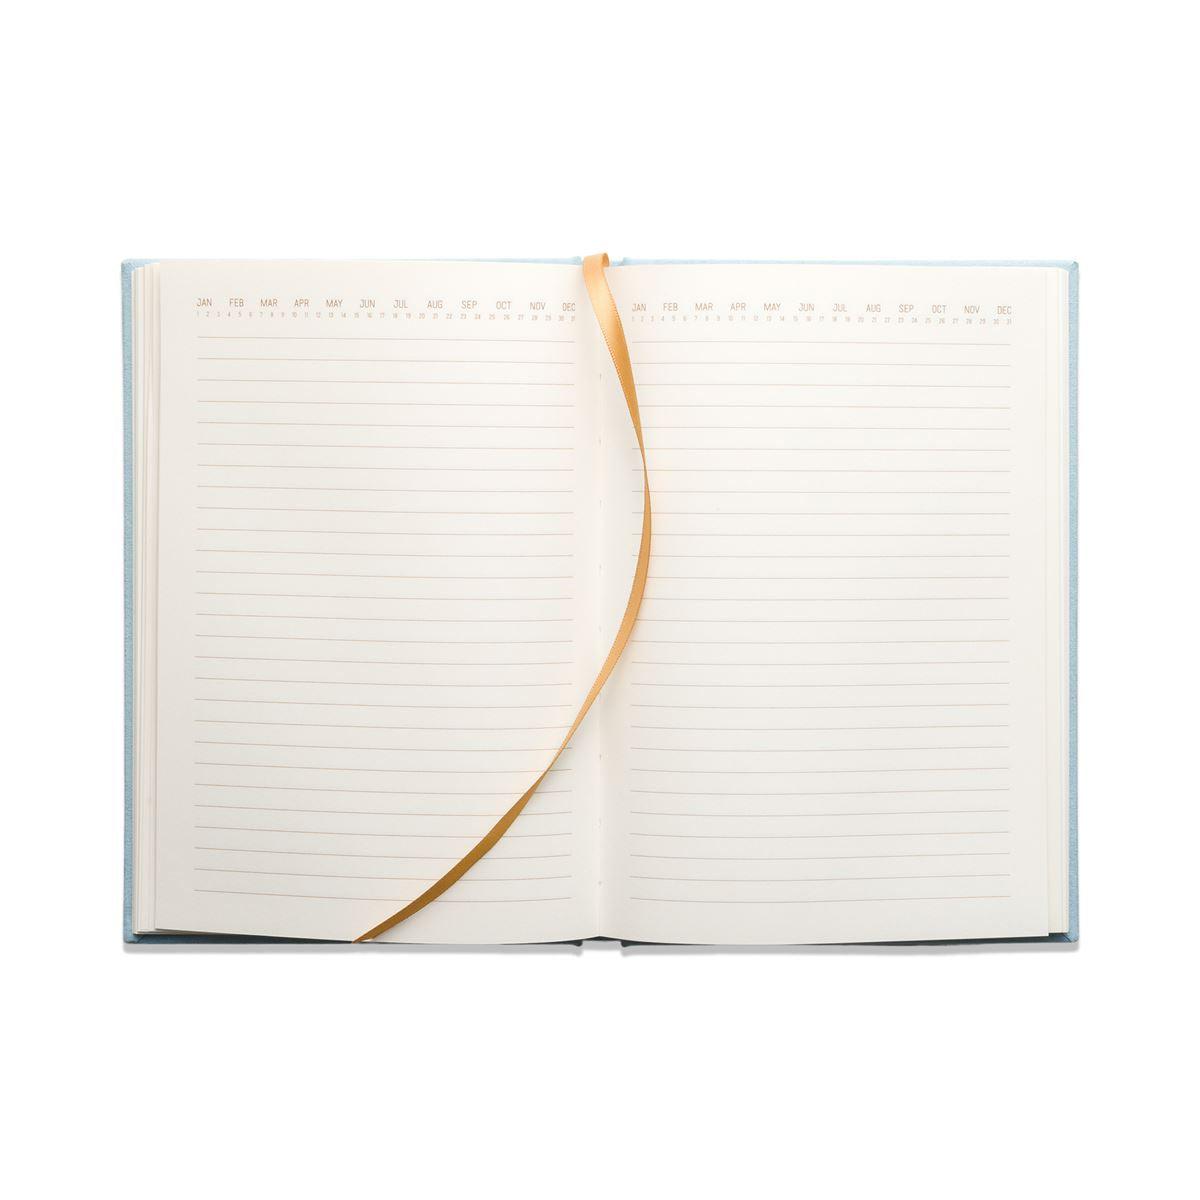 Hard Cover Suede Cloth Journal With Pocket - Arch Dot Blue - Handworks Nouveau Paperie